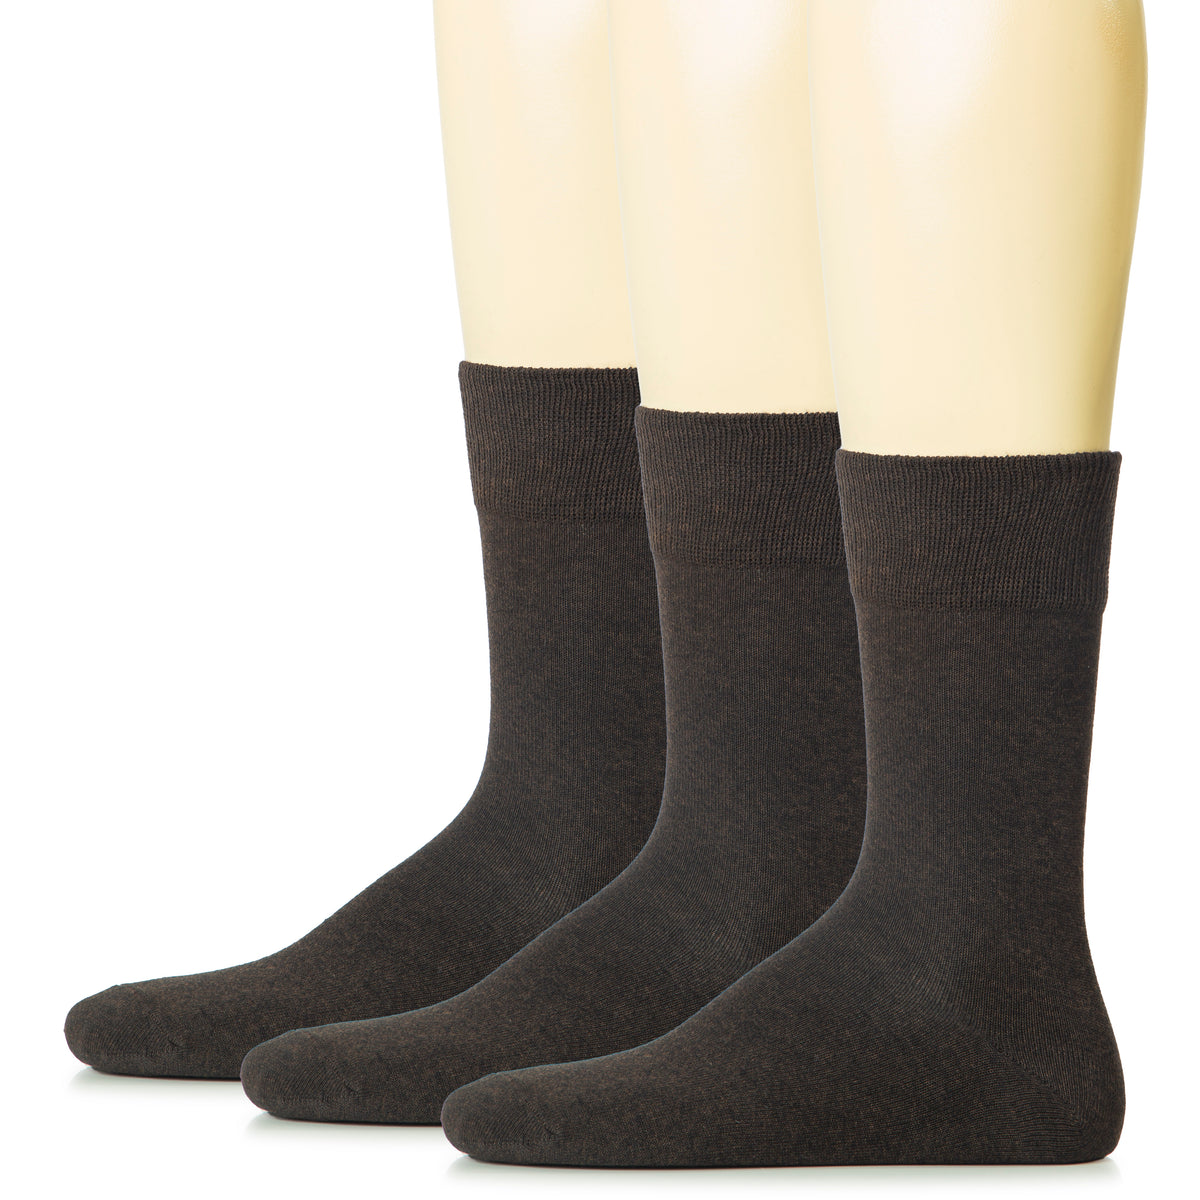 Elevate your sock game with these three pairs of men's cotton crew socks in classic black and brown shades.